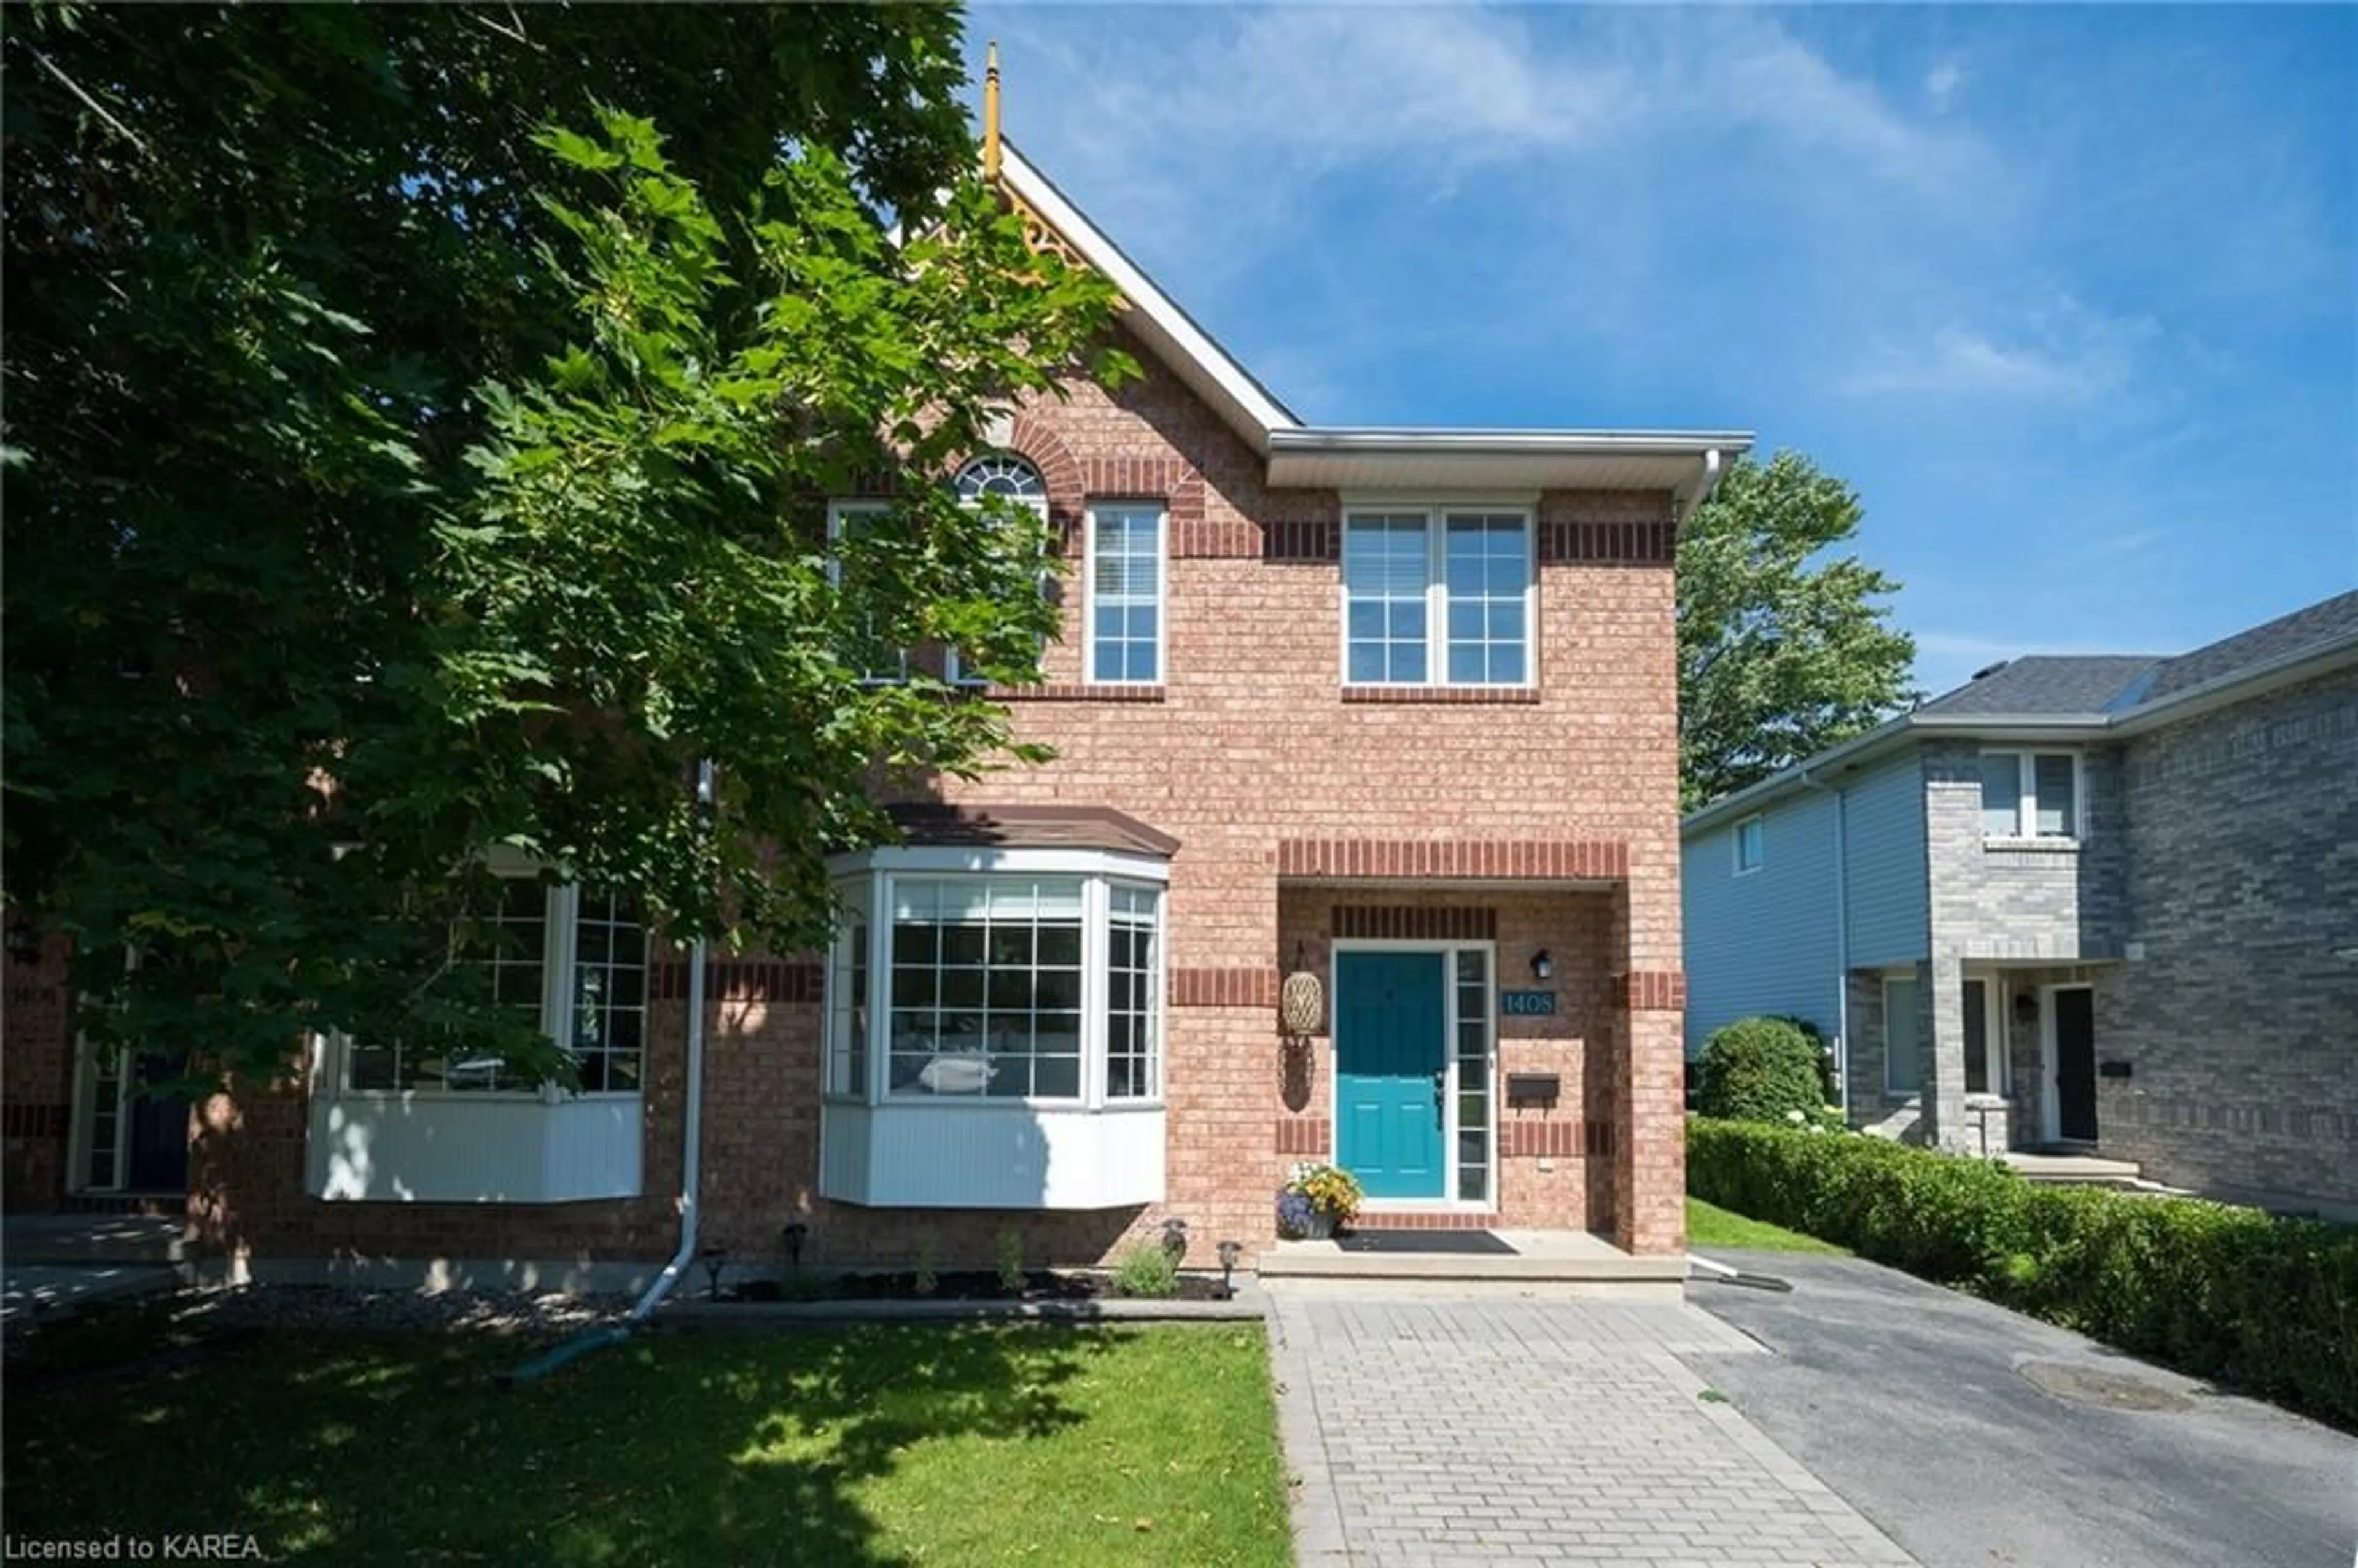 Home with brick exterior material for 1408 Thornwood Cres, Kingston Ontario K7P 3B6